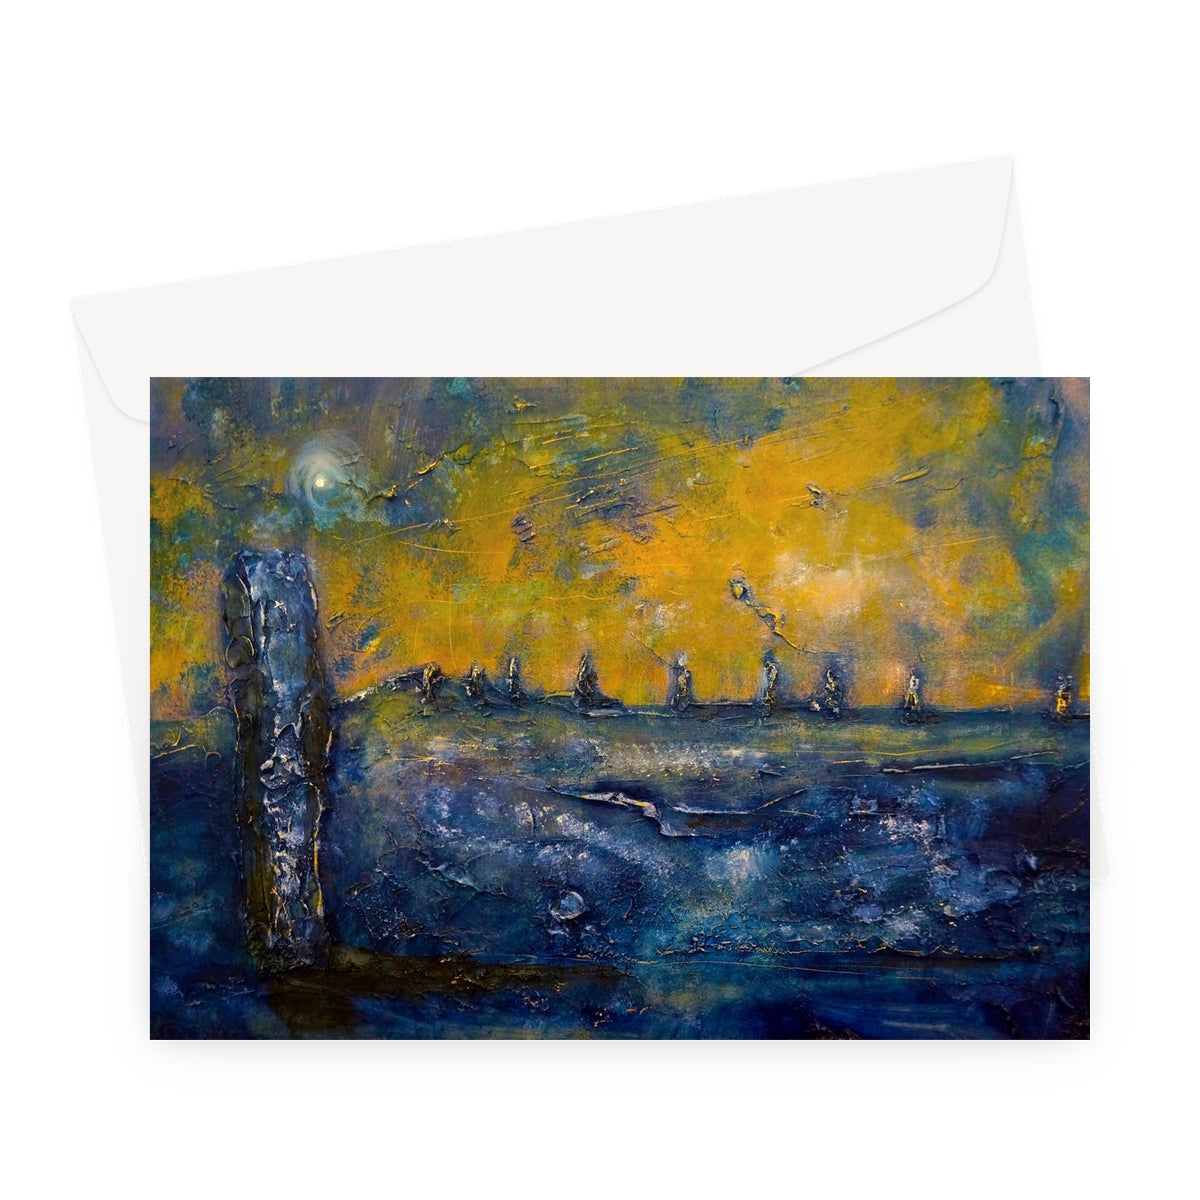 Brodgar Moonlight Orkney Art Gifts Greeting Card-Greetings Cards-Orkney Art Gallery-A5 Landscape-10 Cards-Paintings, Prints, Homeware, Art Gifts From Scotland By Scottish Artist Kevin Hunter